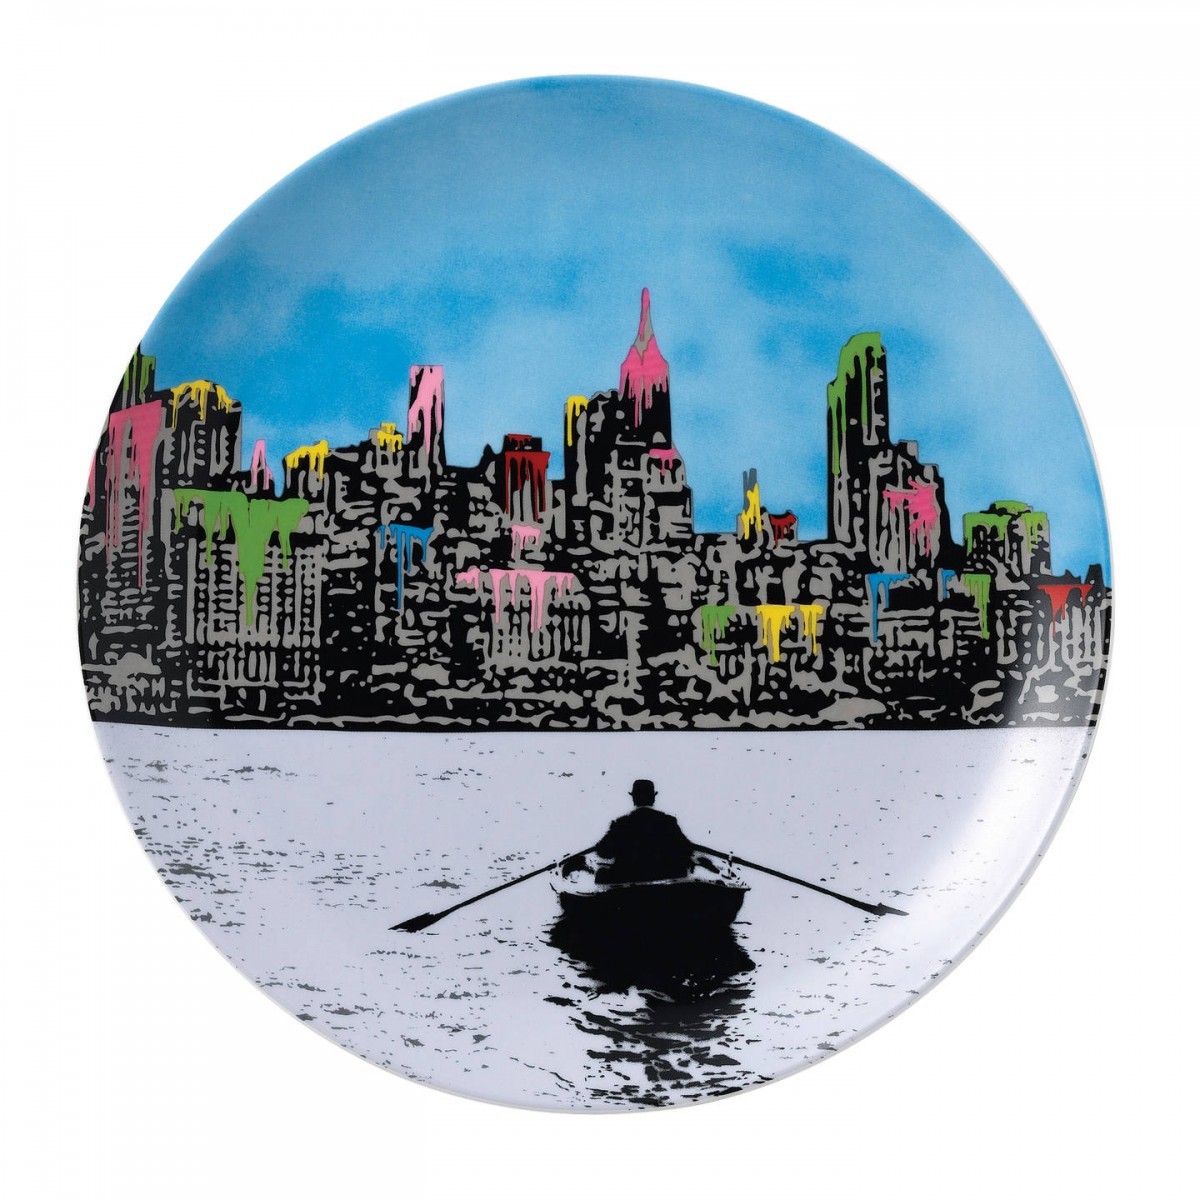 ROYAL DOULTON - NICK WALKER - 27cm PLATE - THE MORNING AFTER NEW YORK